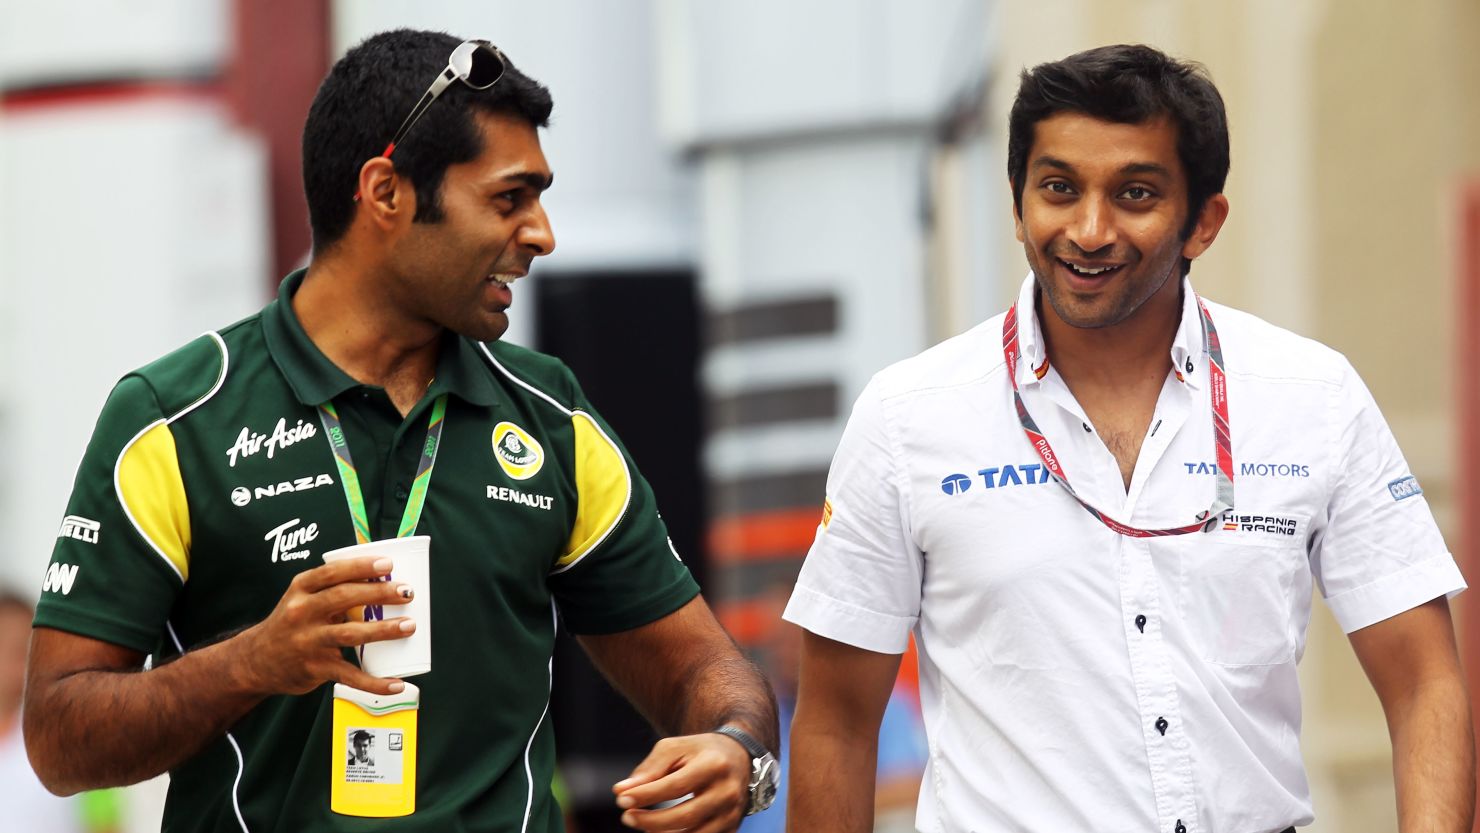 Karun Chandhok (left) and Narain Karthikeyan (right) are the only two Indians to have competed in Formula One.